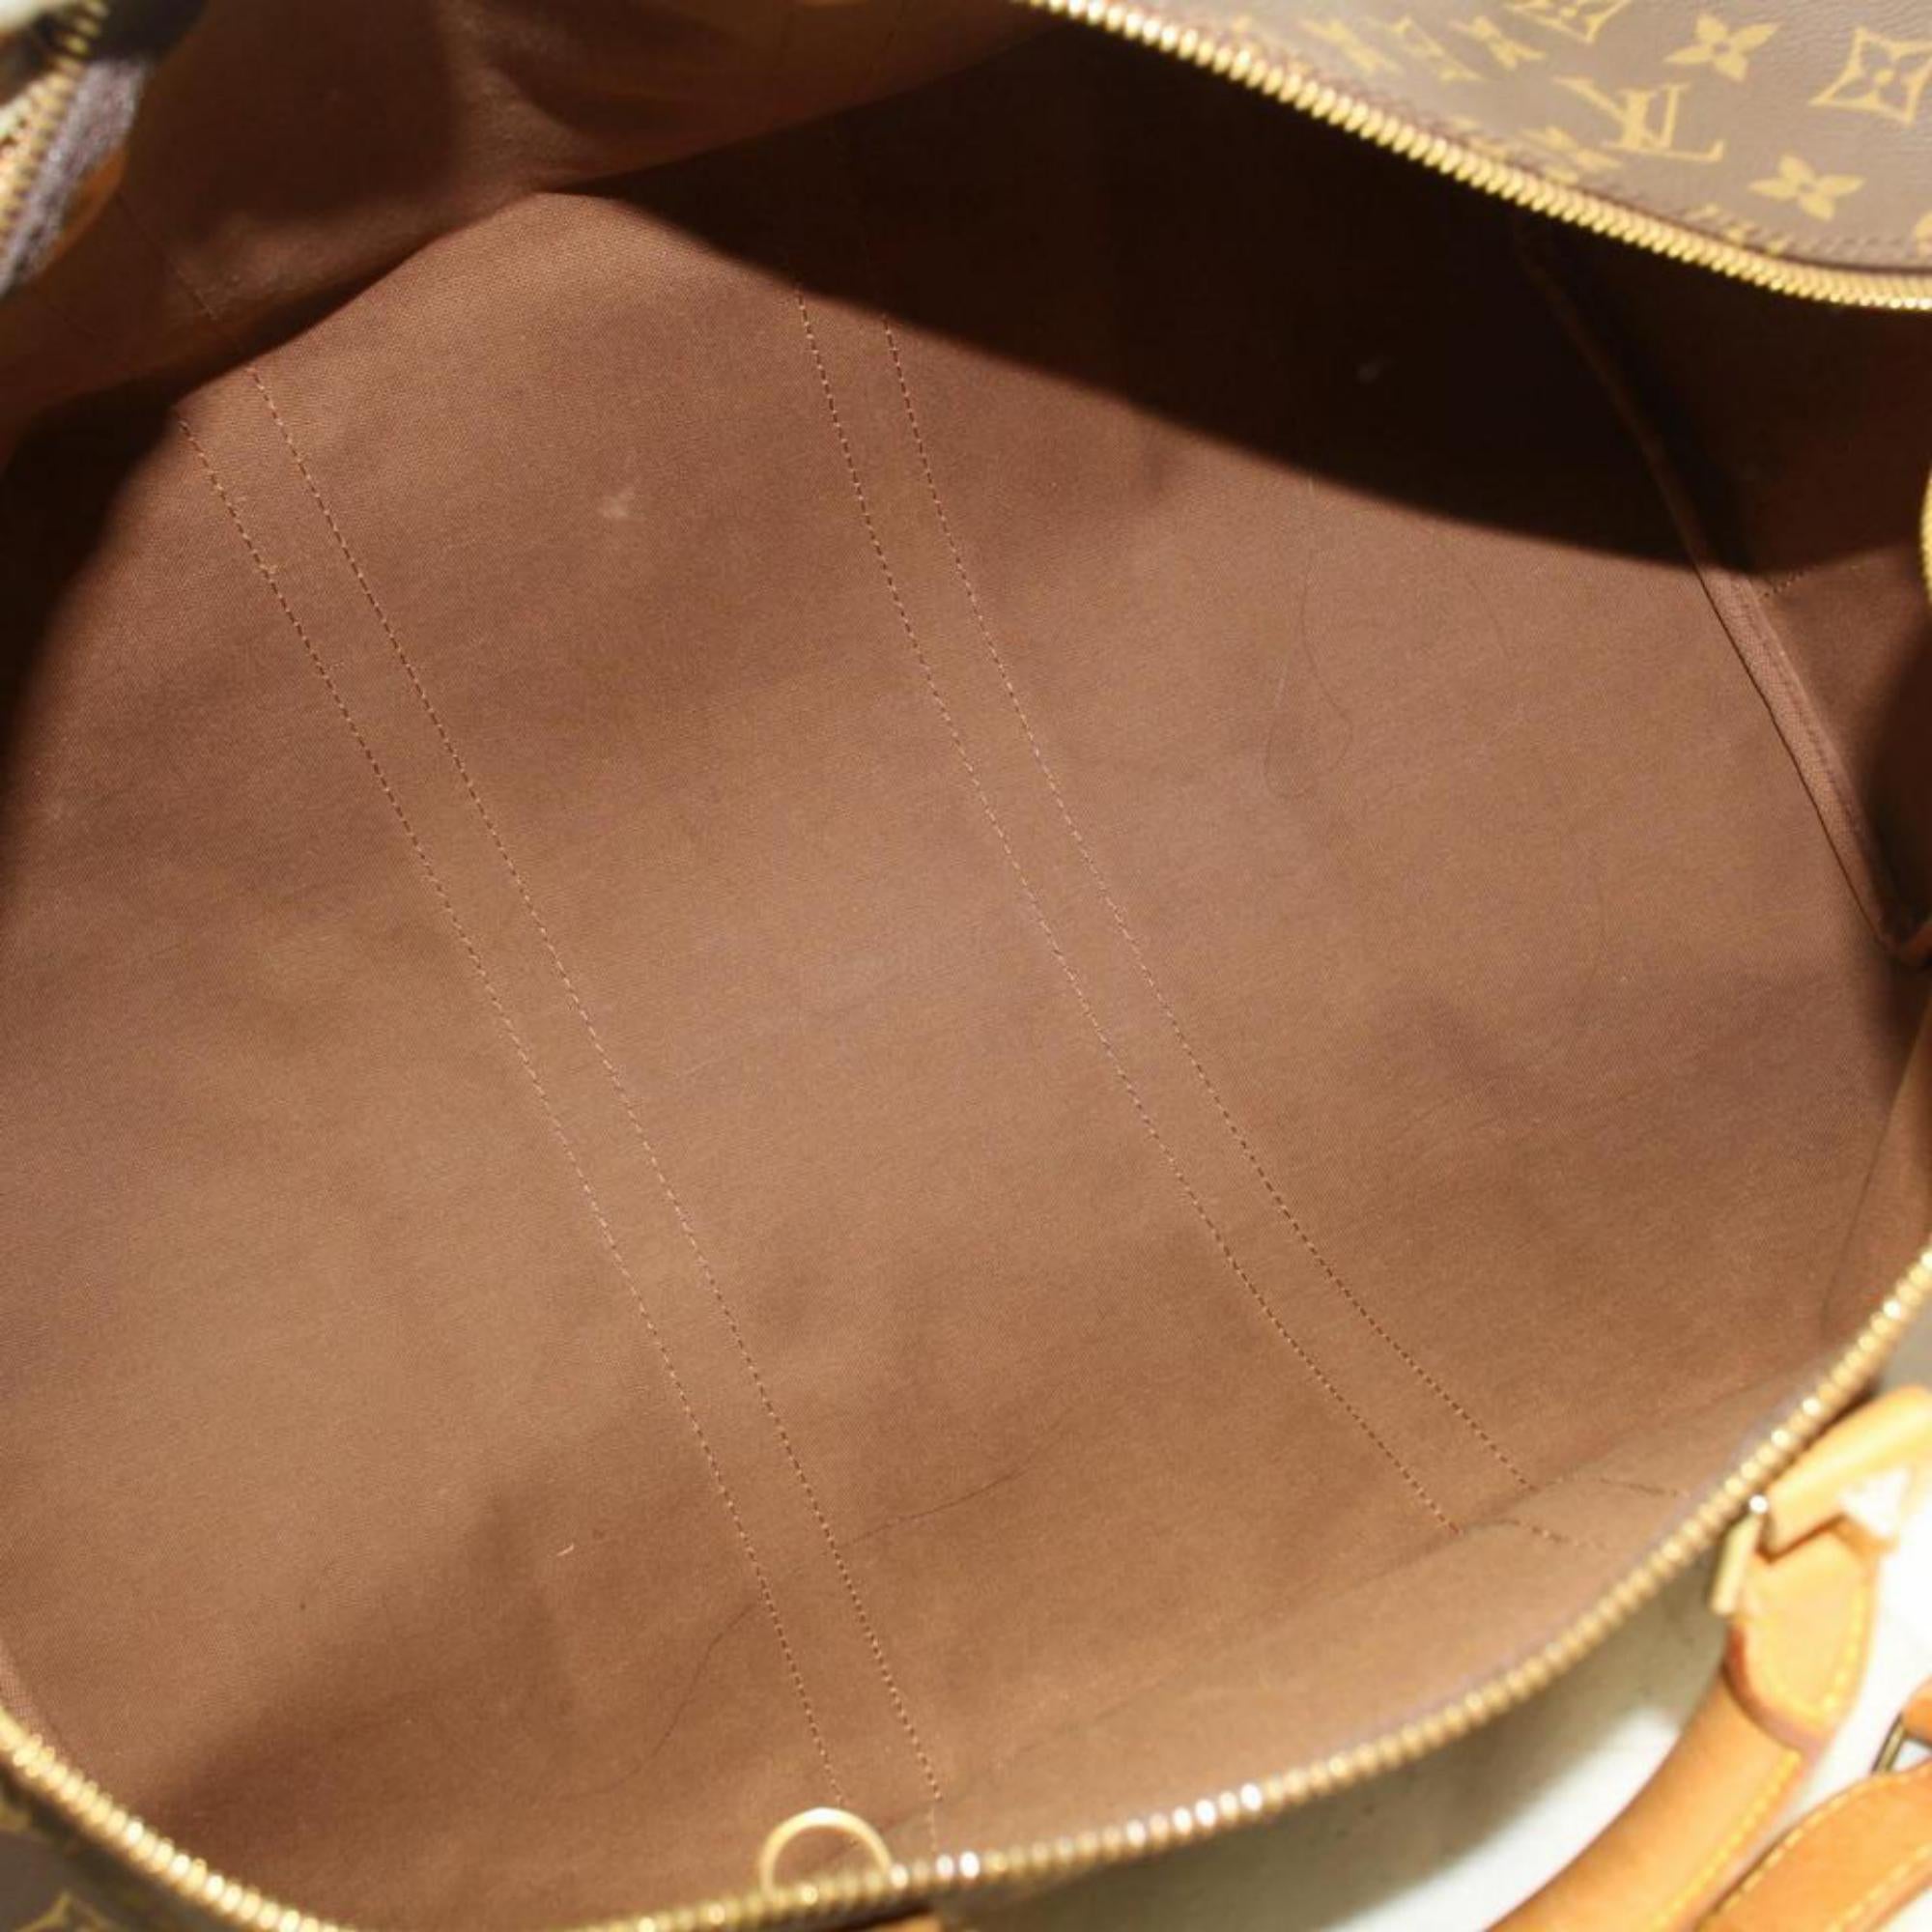 Louis Vuitton Keepall Duffle Monogram Bandouliere 50 869035 Weekend/Travel Bag In Excellent Condition For Sale In Forest Hills, NY